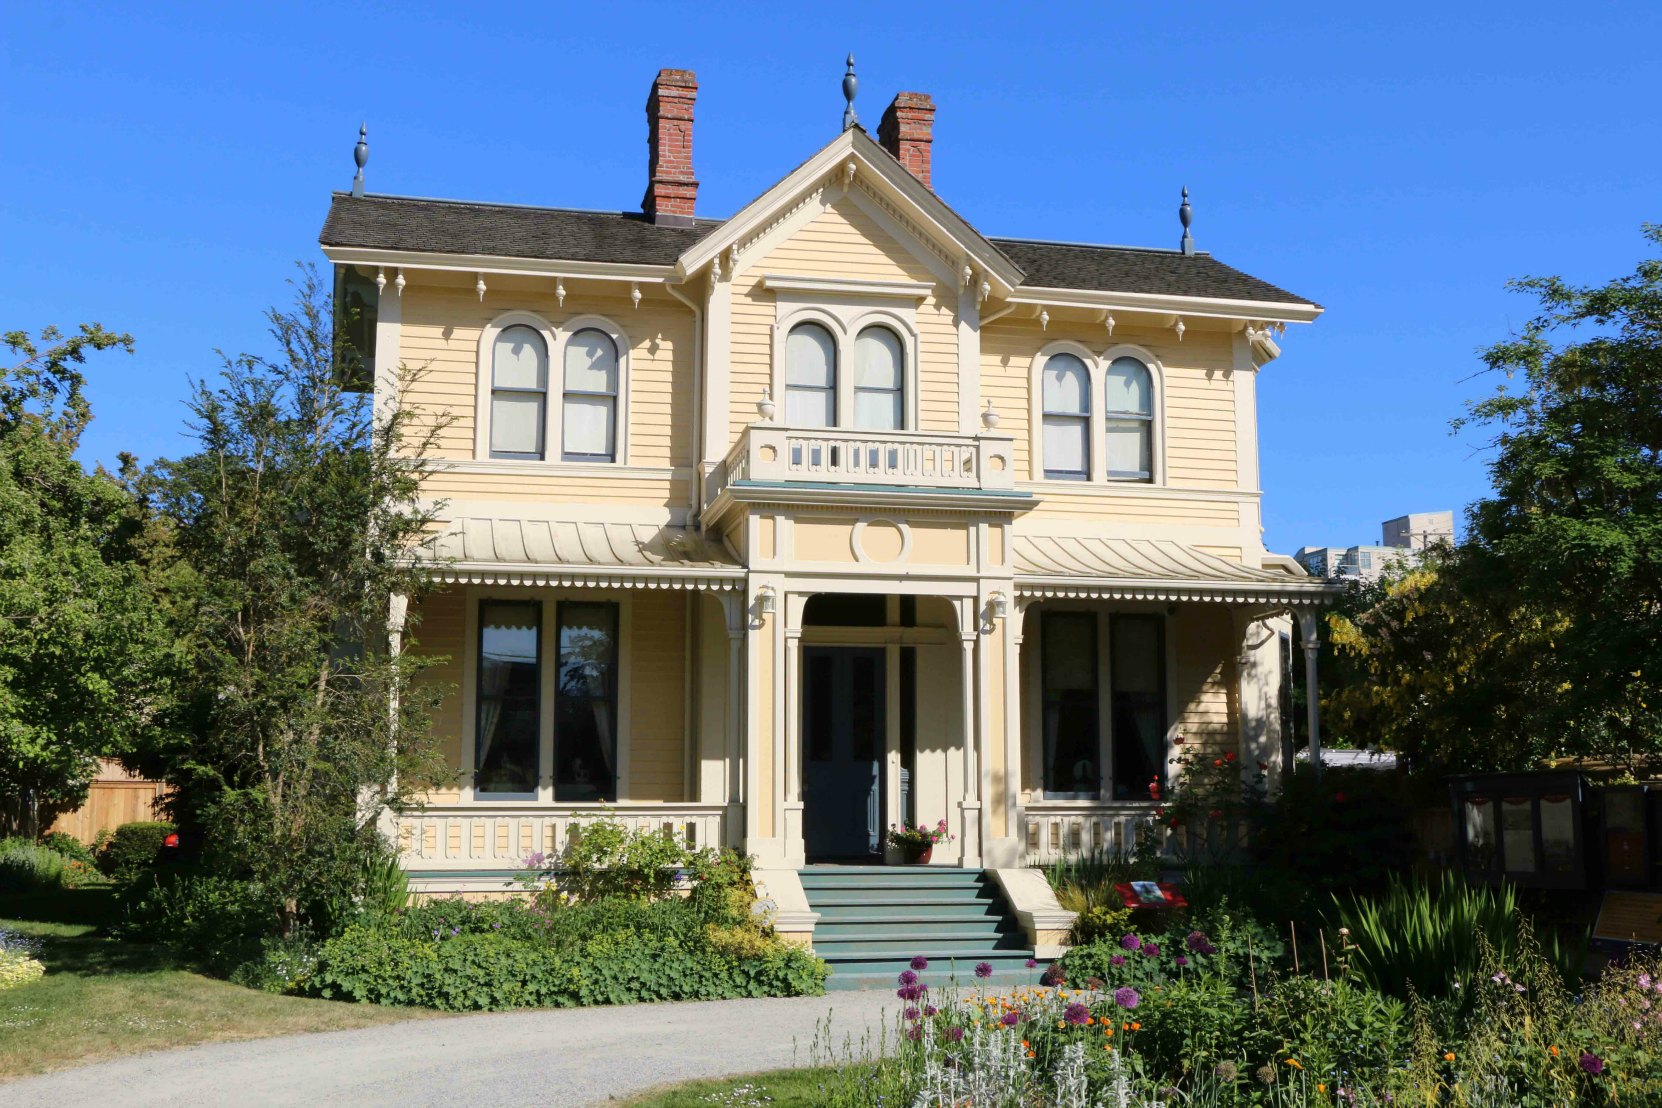 Emily Carr House, 207 Government Street, built circa 1863, is now a National Historic Site of Canada